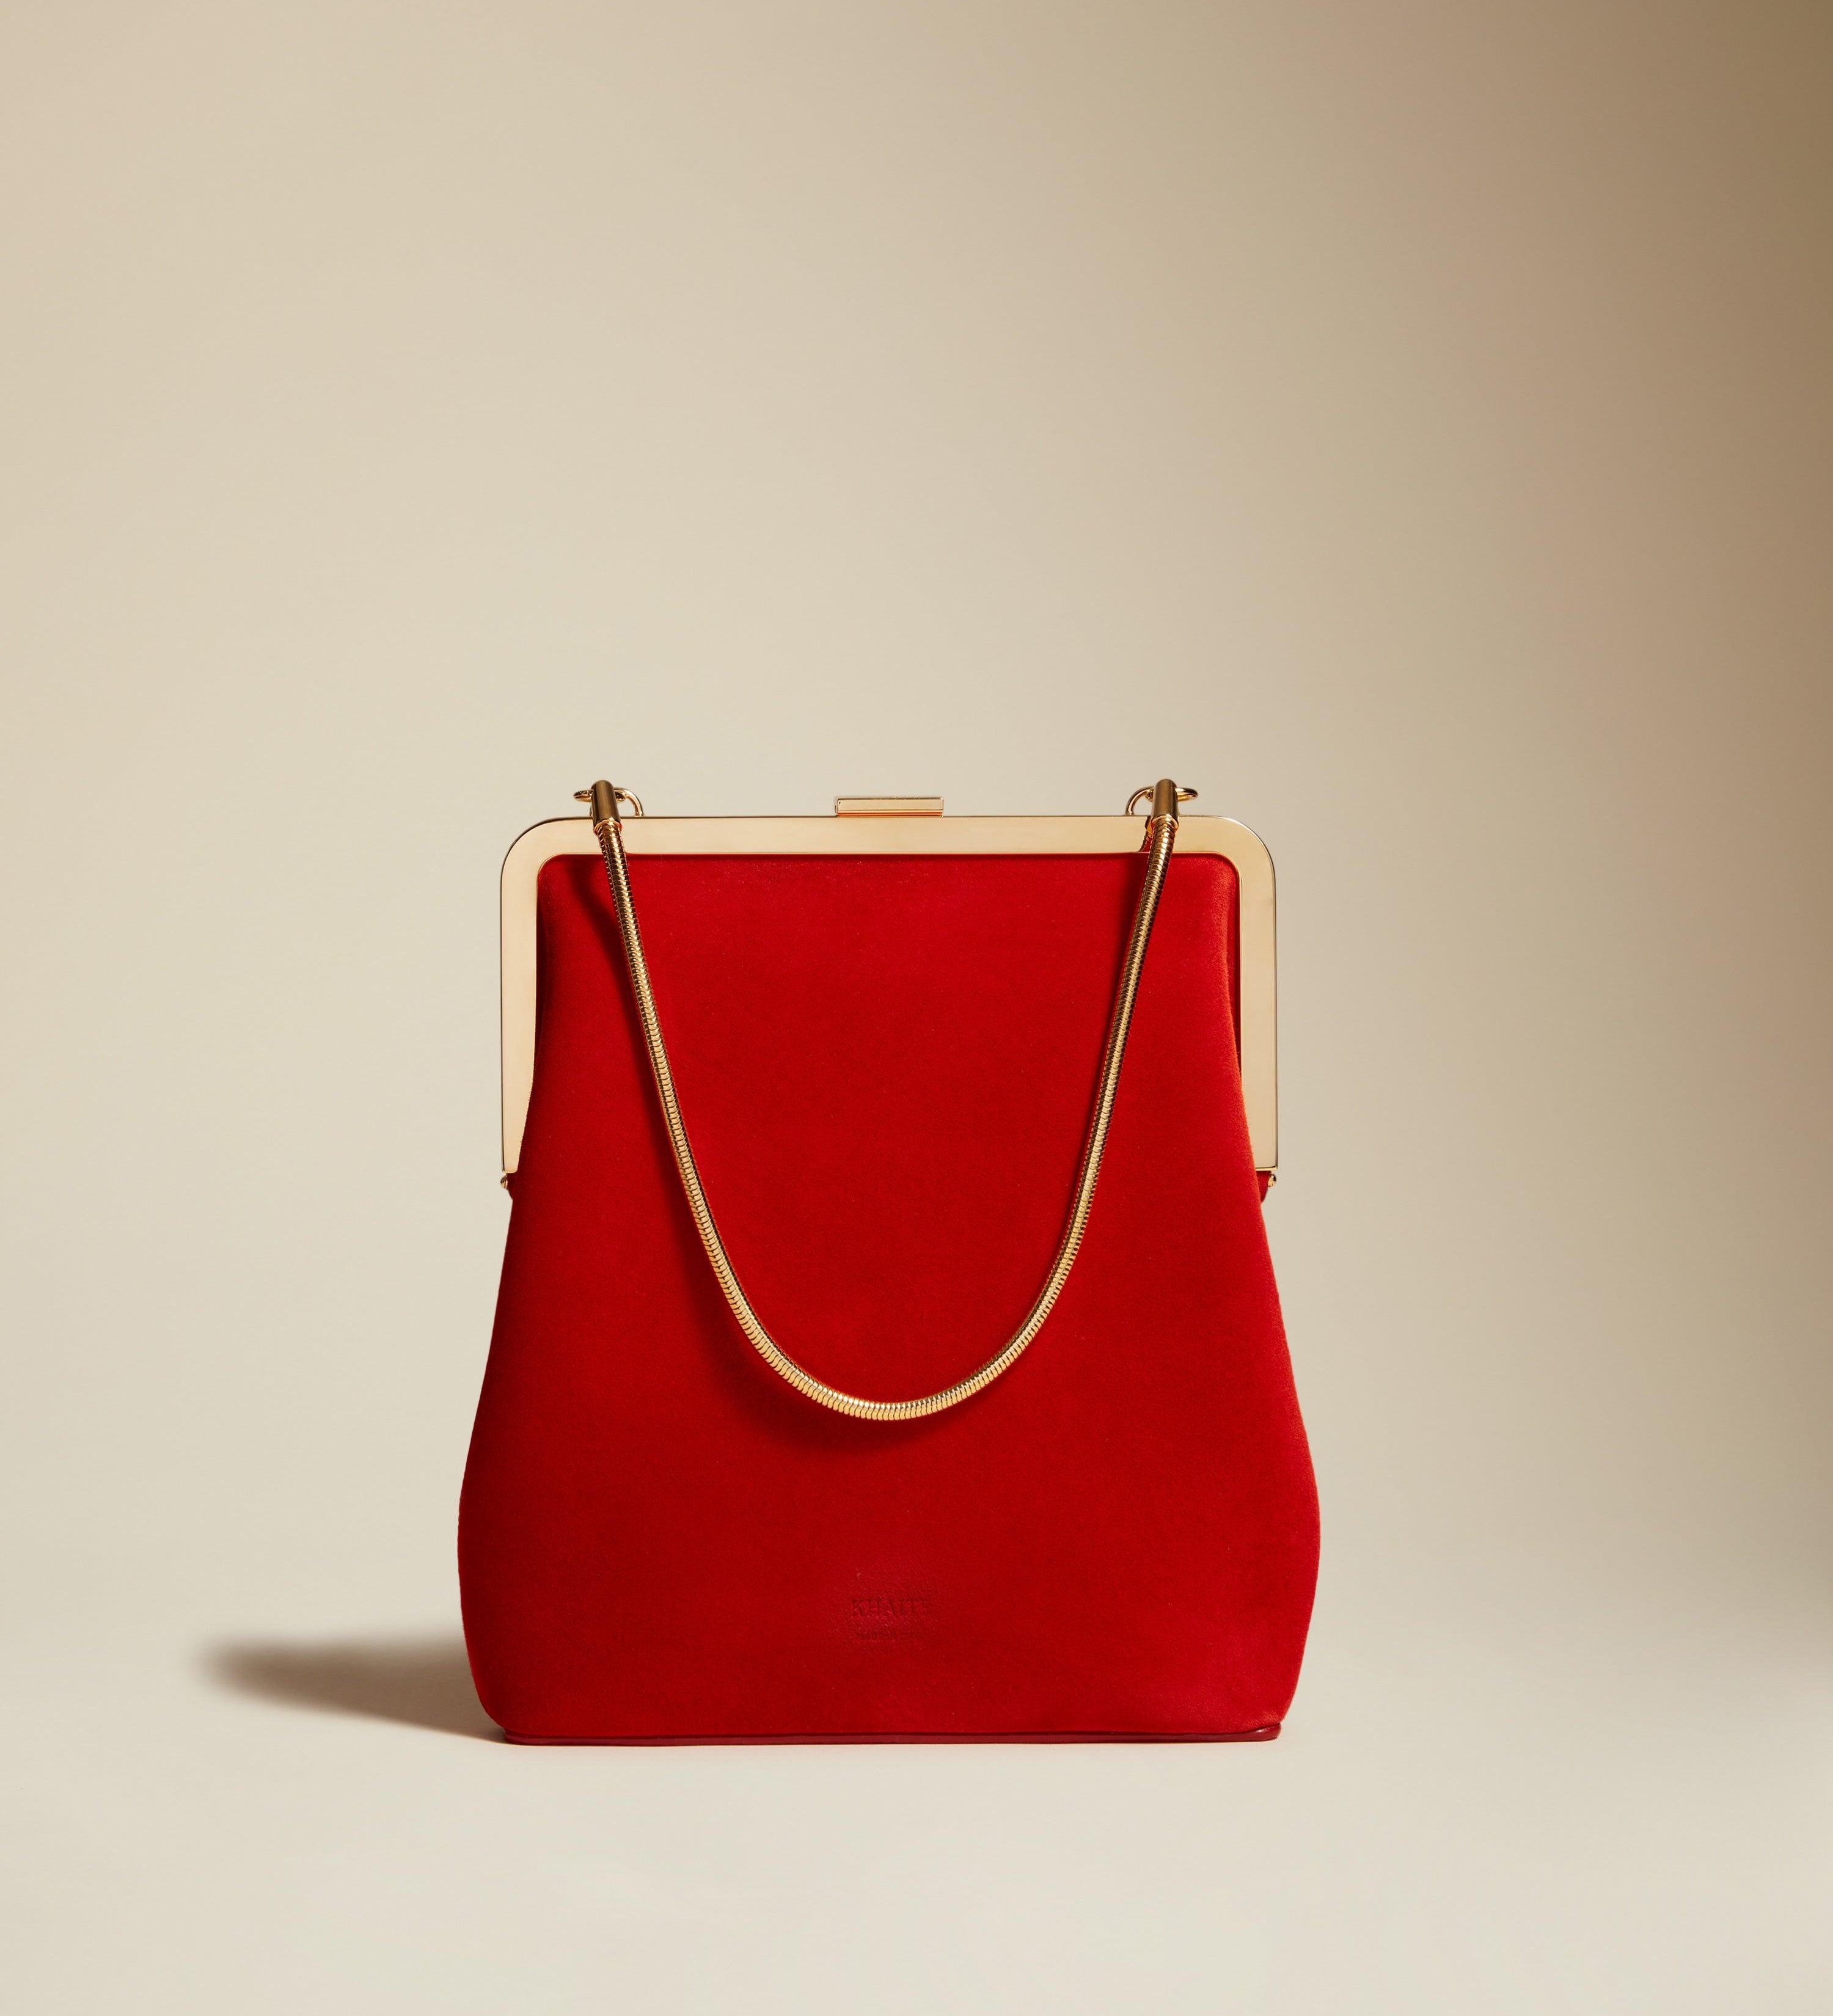 The Lilith Evening Bag in Scarlet Suede - The Iconic Issue